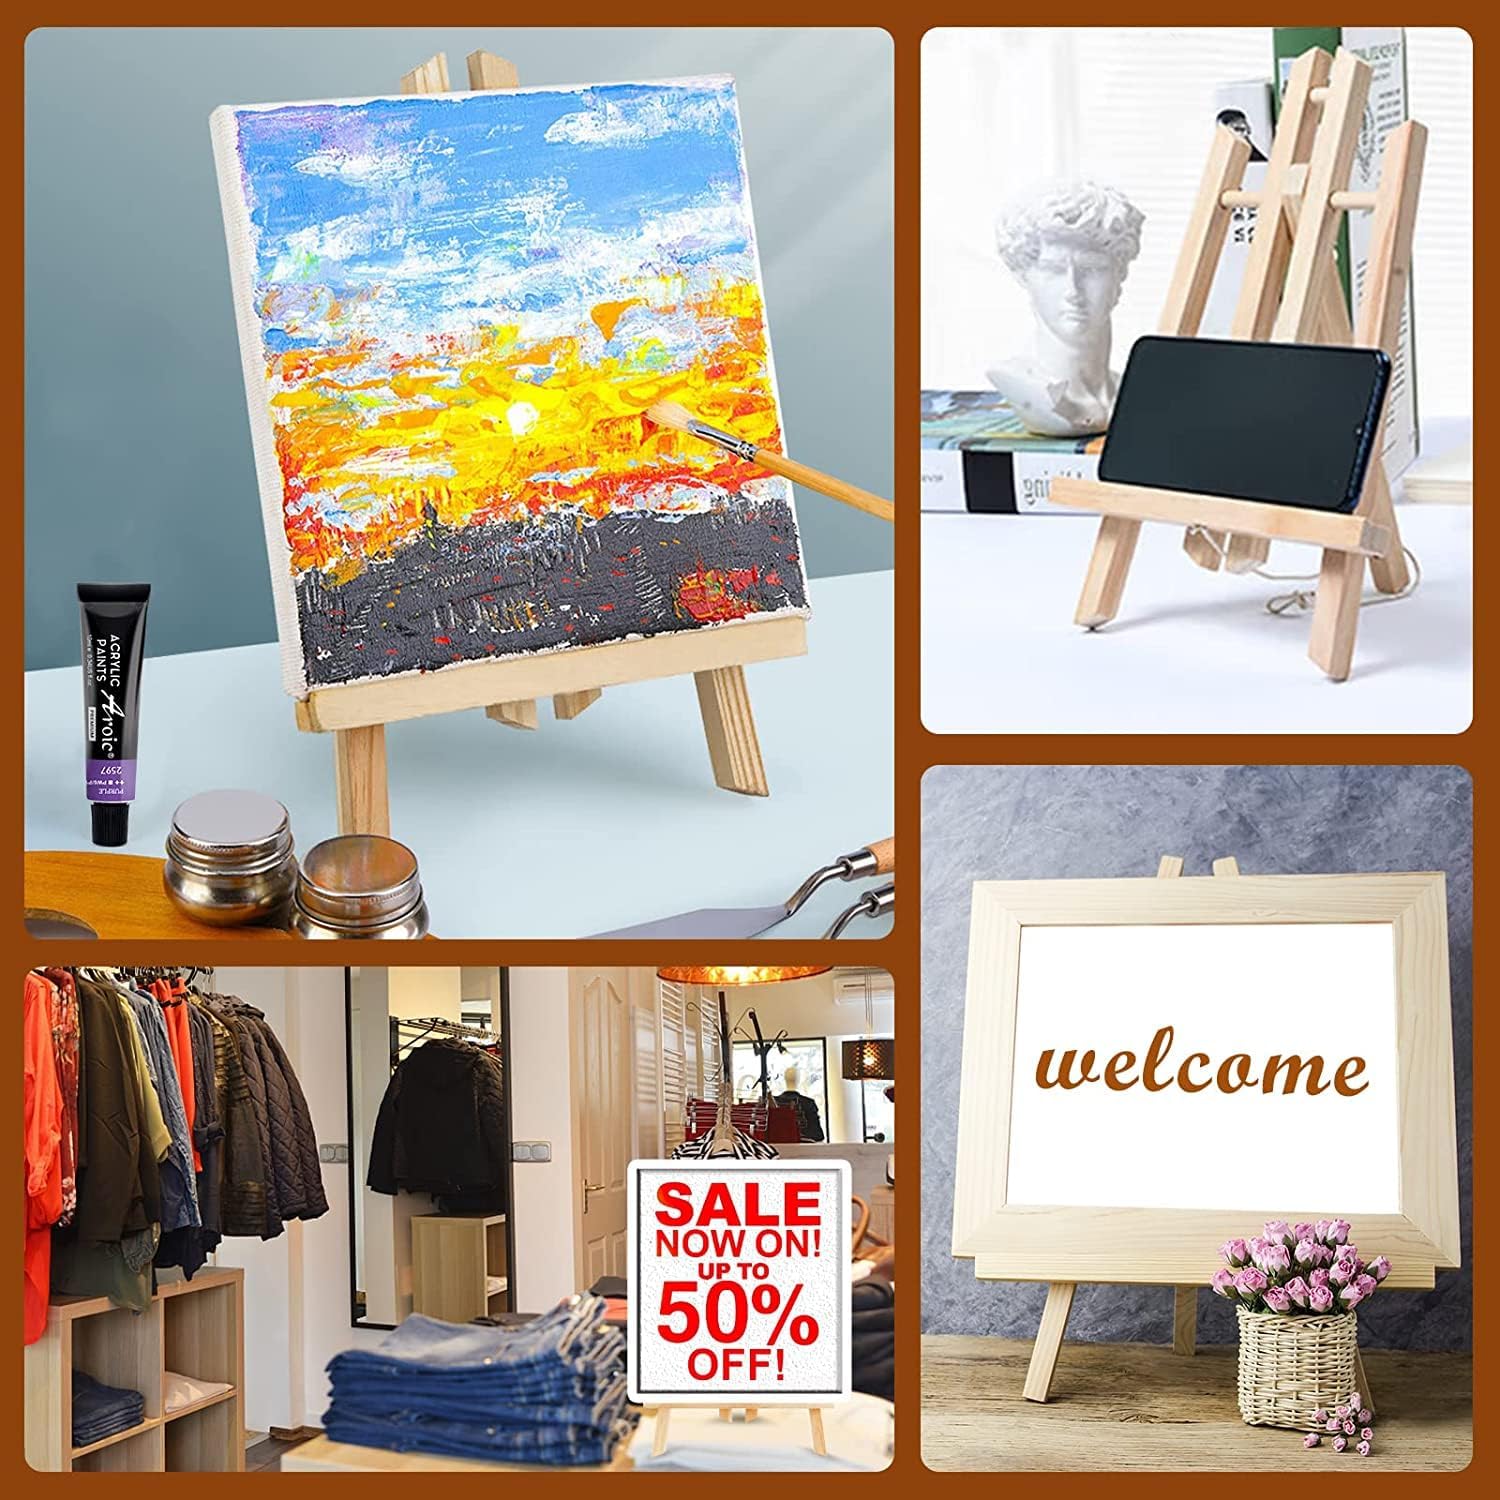 Drawing Painting Wooden Easel Stand / Poster Stand/ Welcome Board Stand  /Display